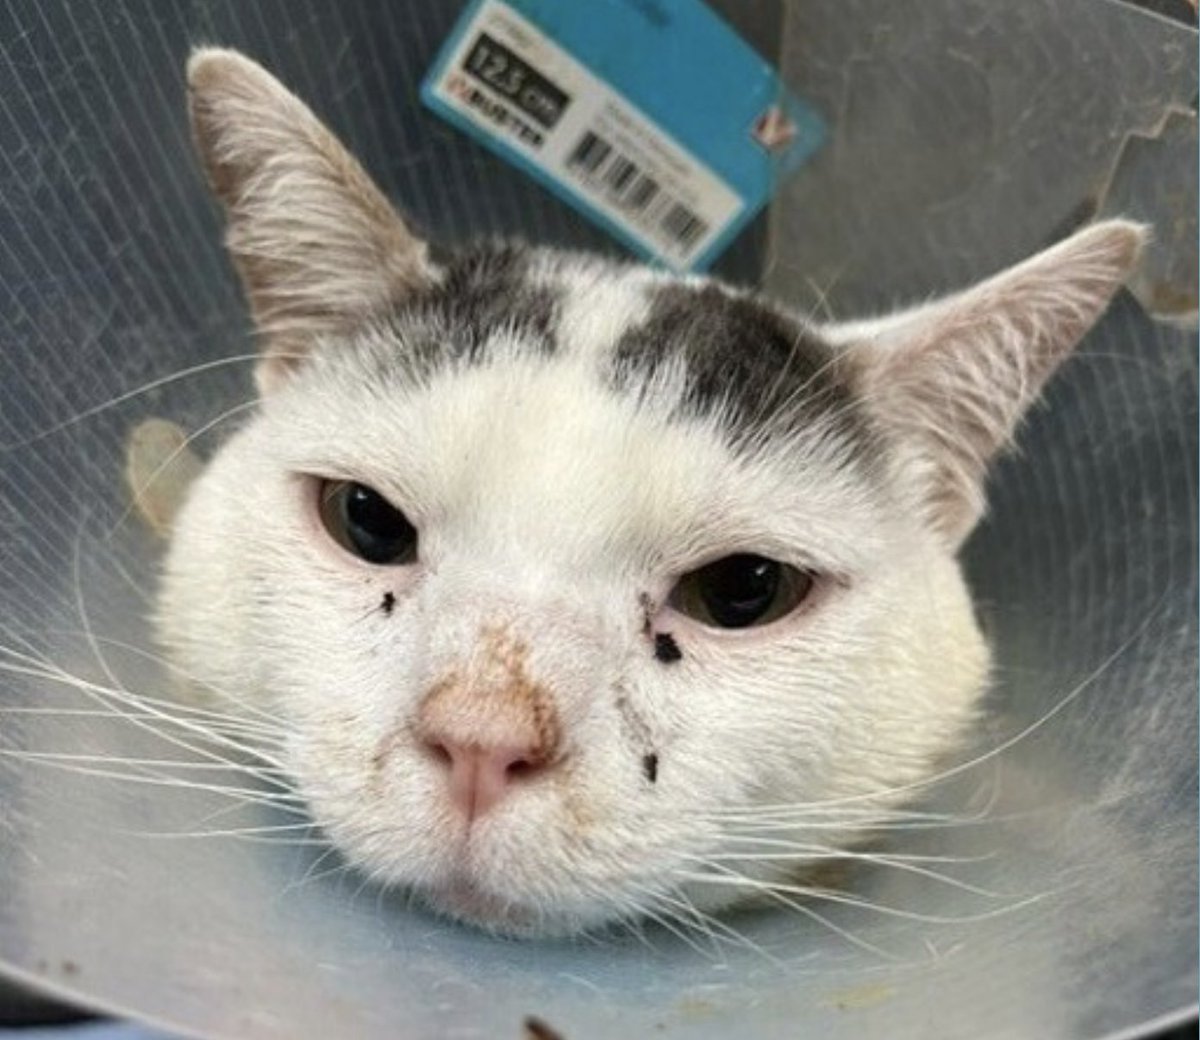 🆘🆘for Royaltee 1 yo 🆘🆘 Already 45 days in Manhattan ACC 🔥 🚨Medical Priority 🚨 ROYALTEE HAD HIS LEFT LEG AMPUTATED AND NEEDS A LOVING HOME 😿💔🙏 Queens Park Rangers came with this stray male catthat was found inside of forest park in a carrier. Please Rt or pledge if